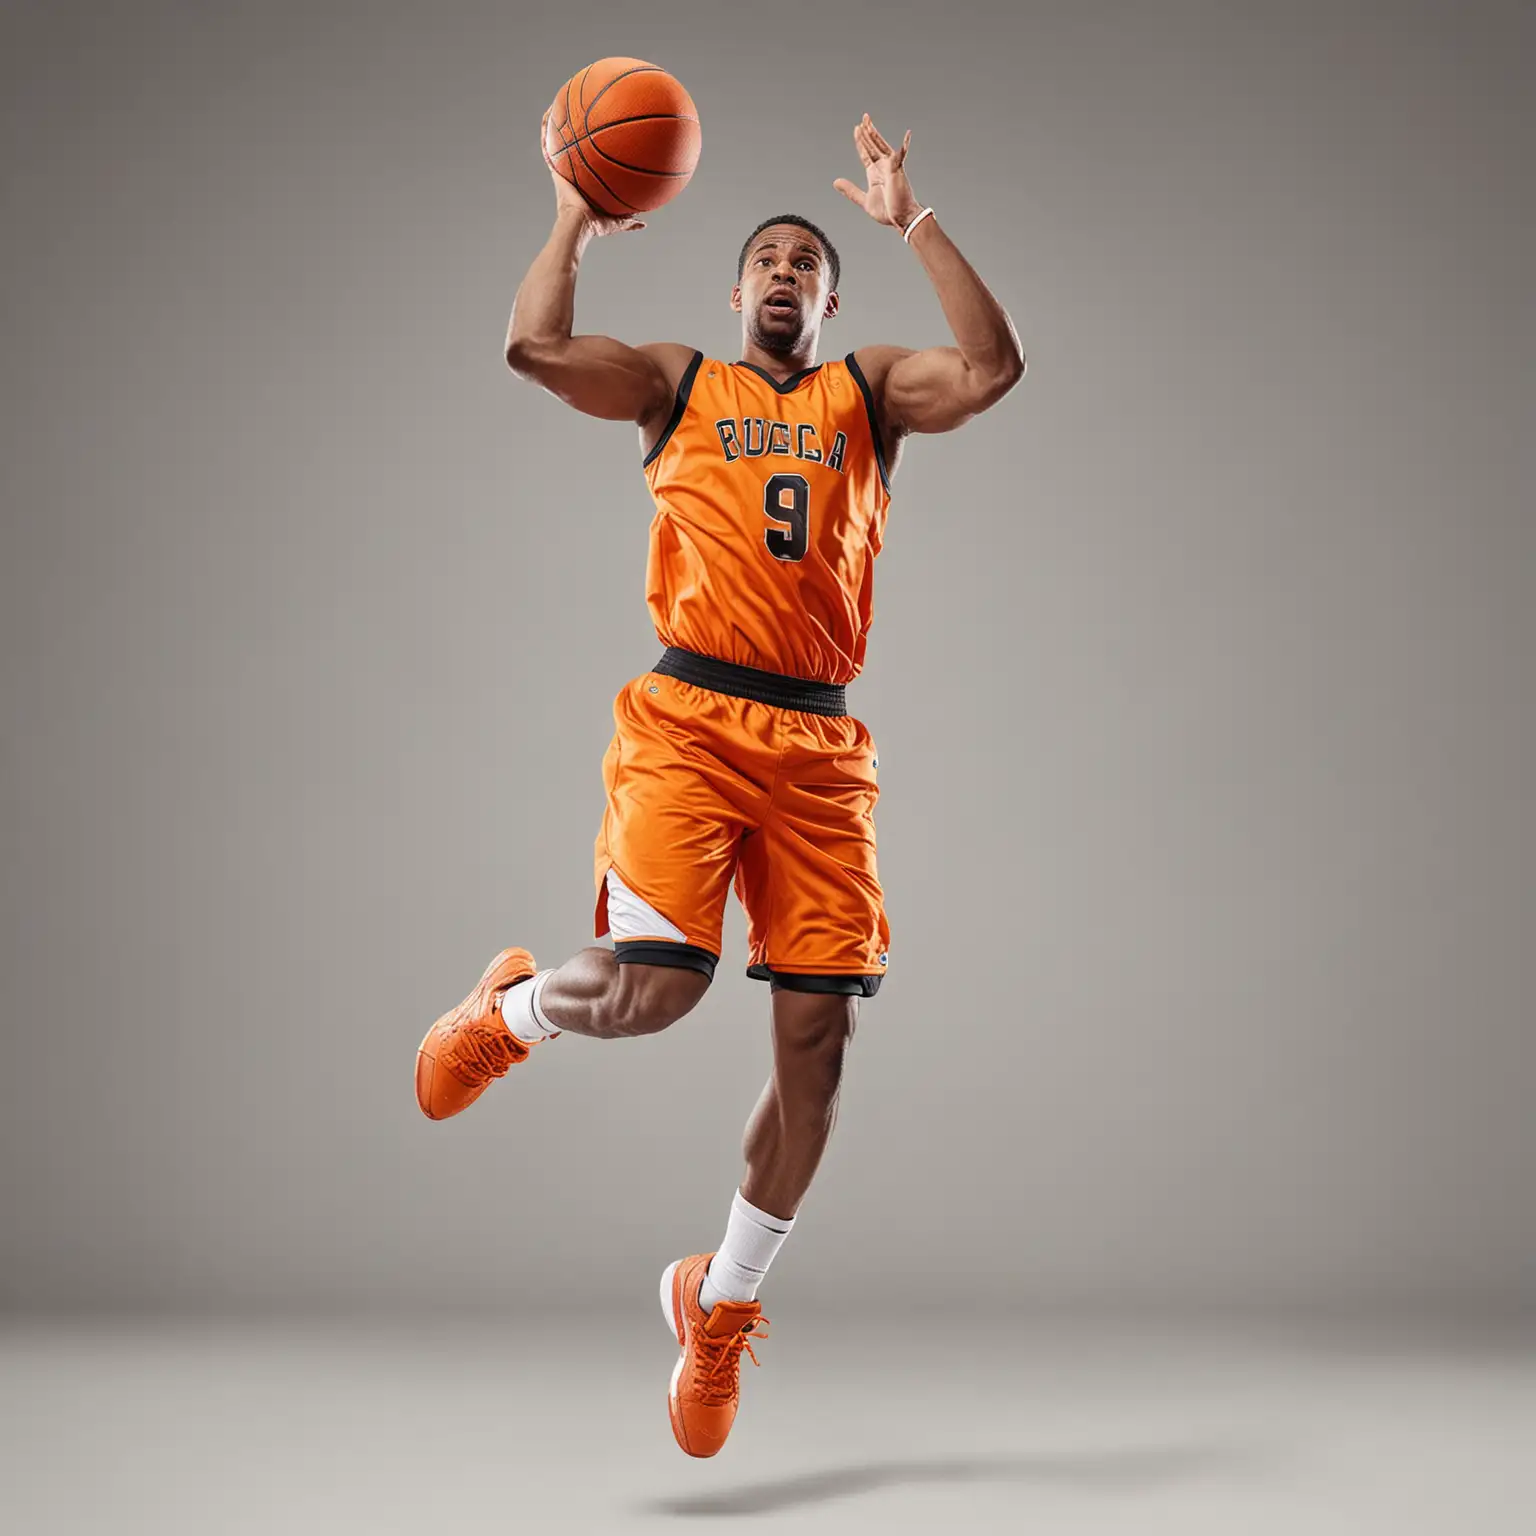 realistic basketball player jumping up with basketball, isolated on white background, orange uniform